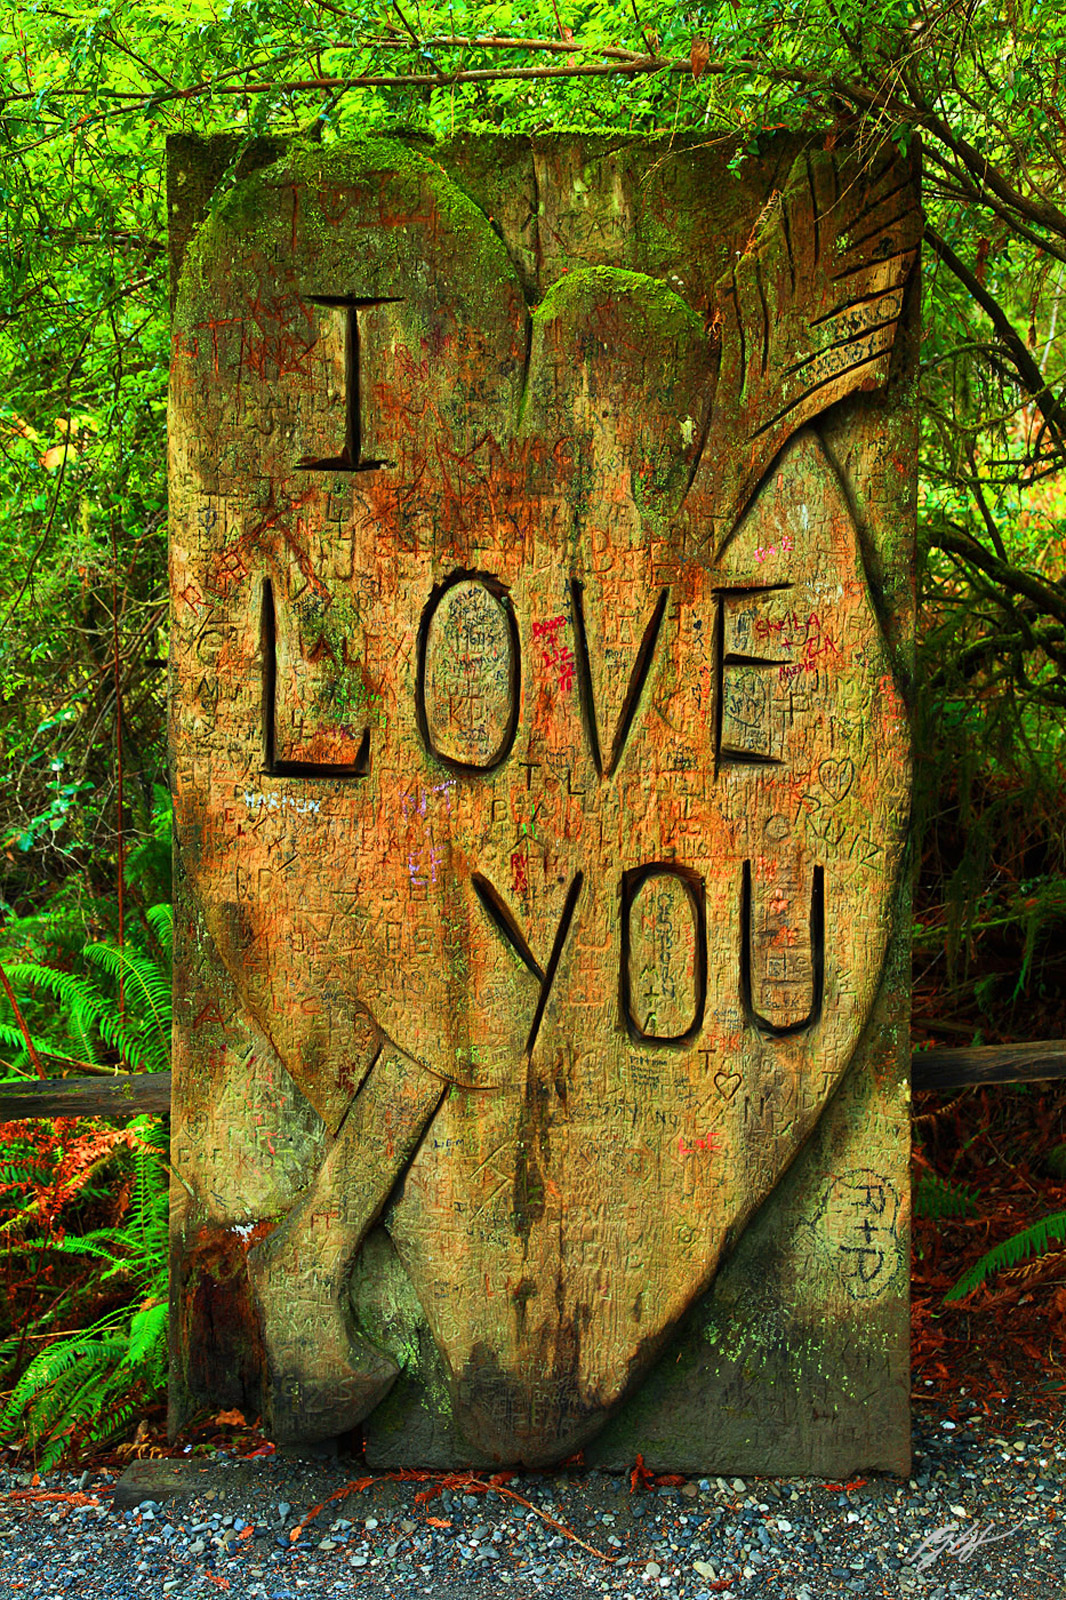 I love You Giant Chainsaw Carving in the Trees of Mystery in the Redwoods in California